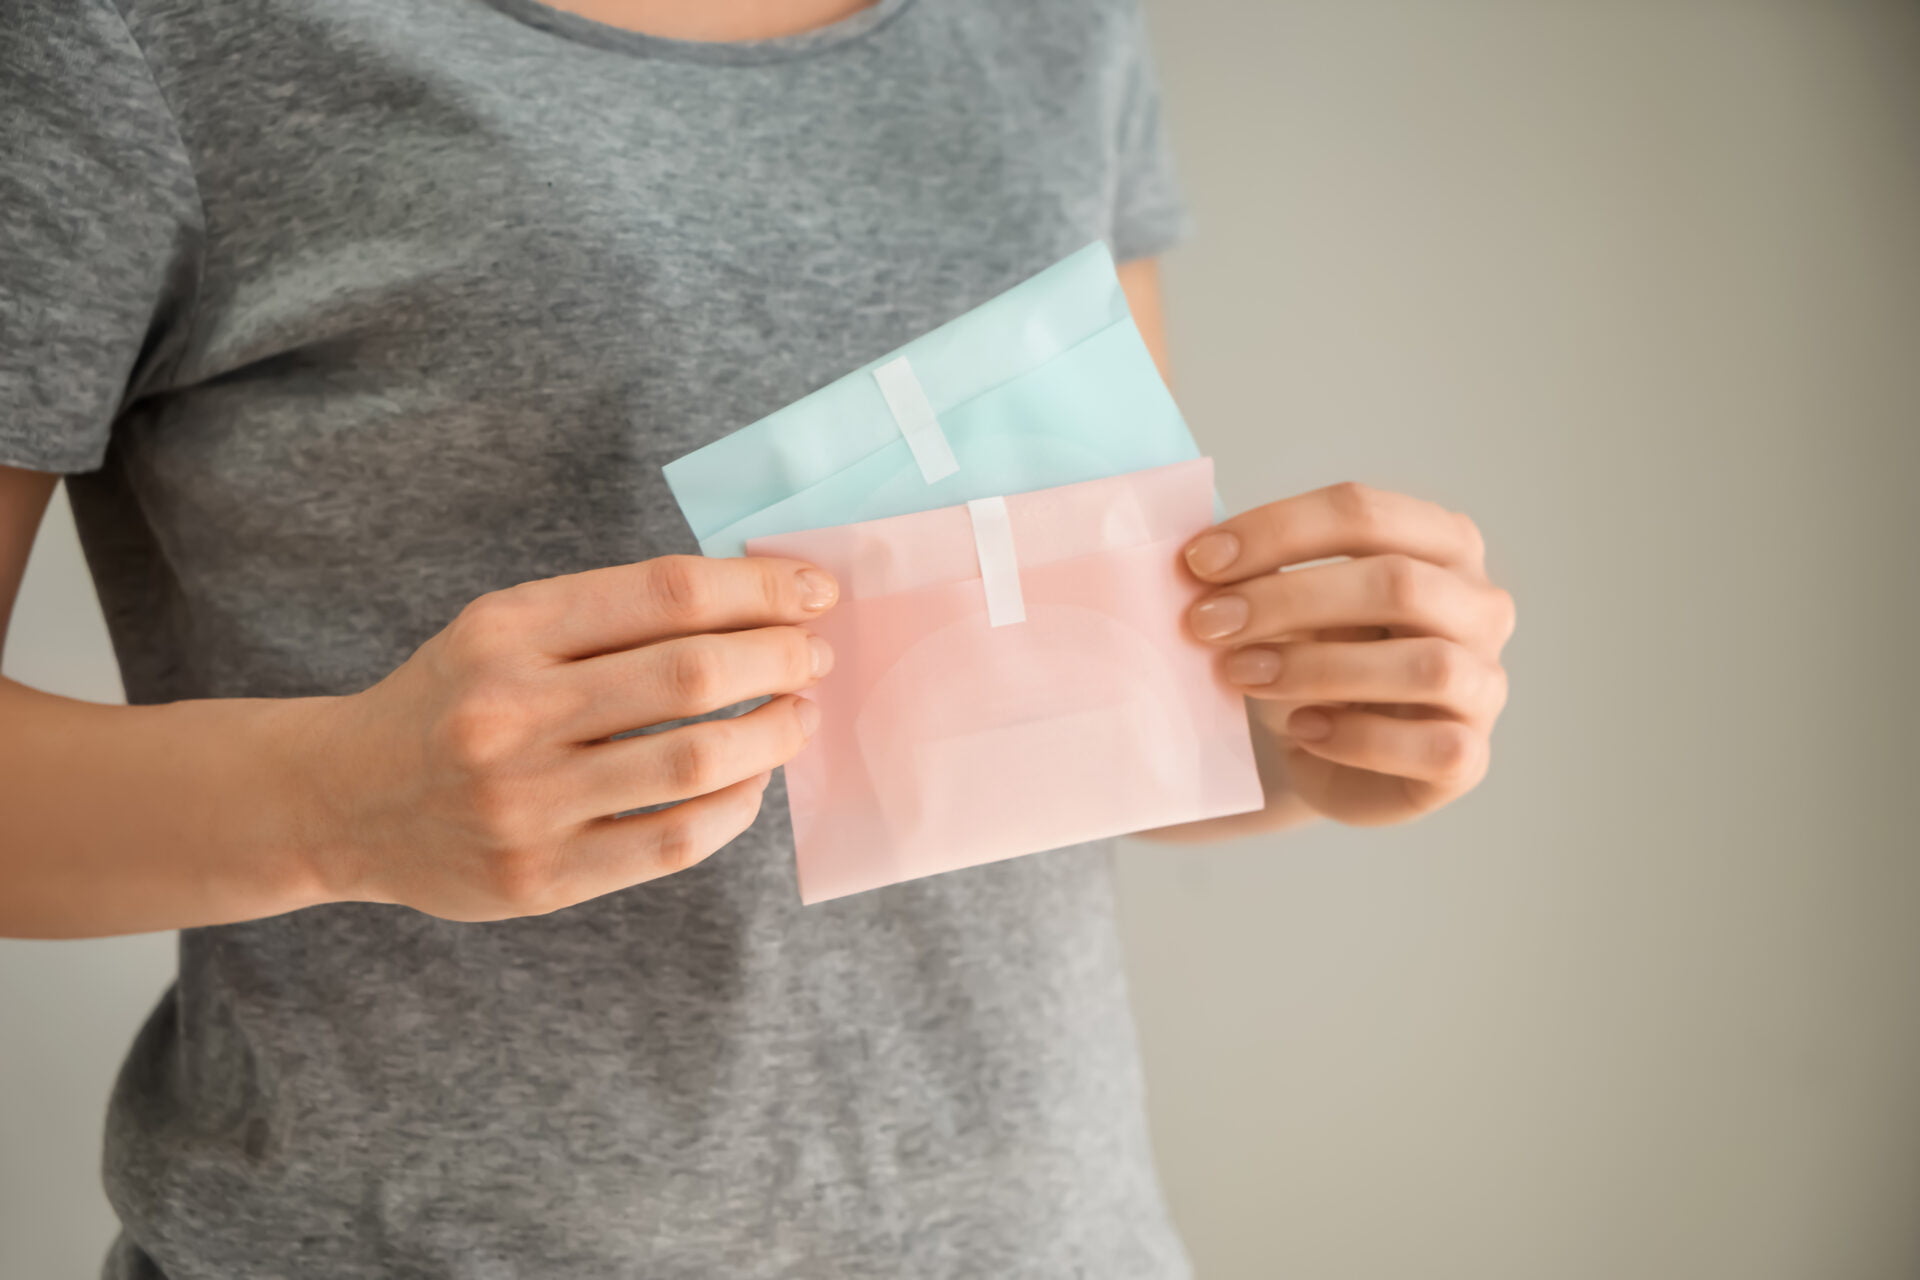 woman holding sanitary pads that could have PFAS "forever chemicals" inside